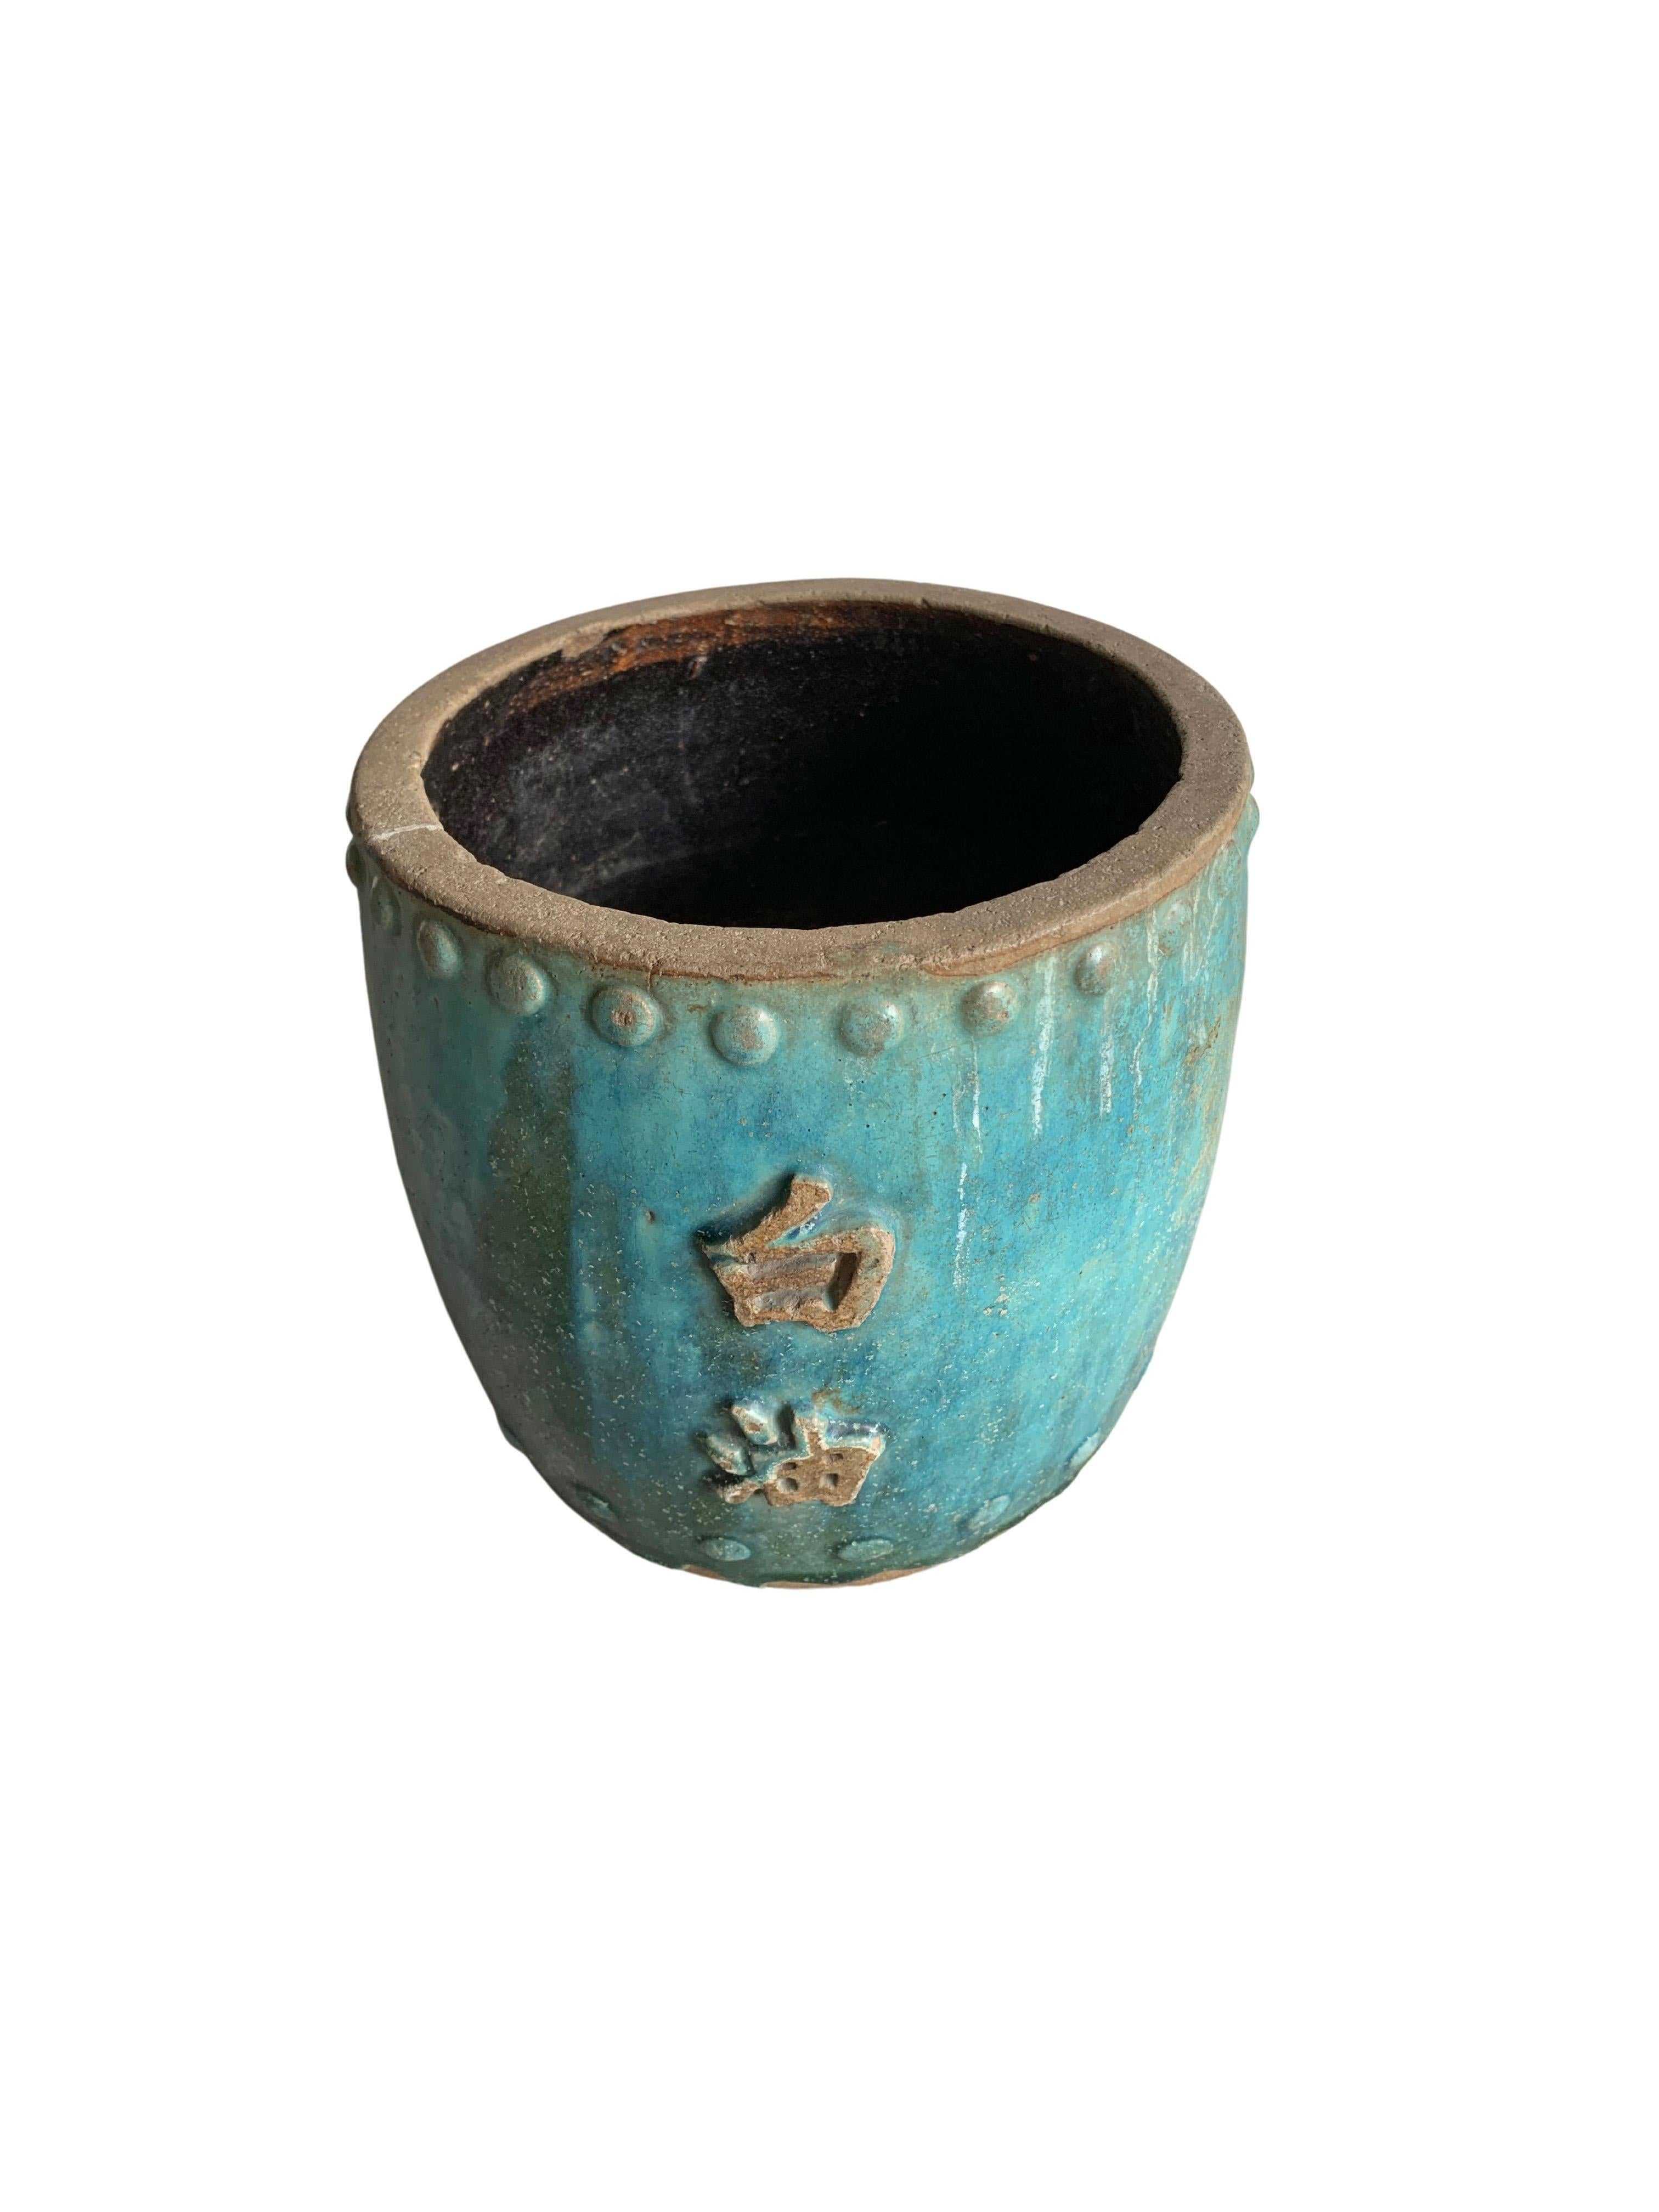 A wonderful green glaze adorns this Early 20th century Chinese ceramic 